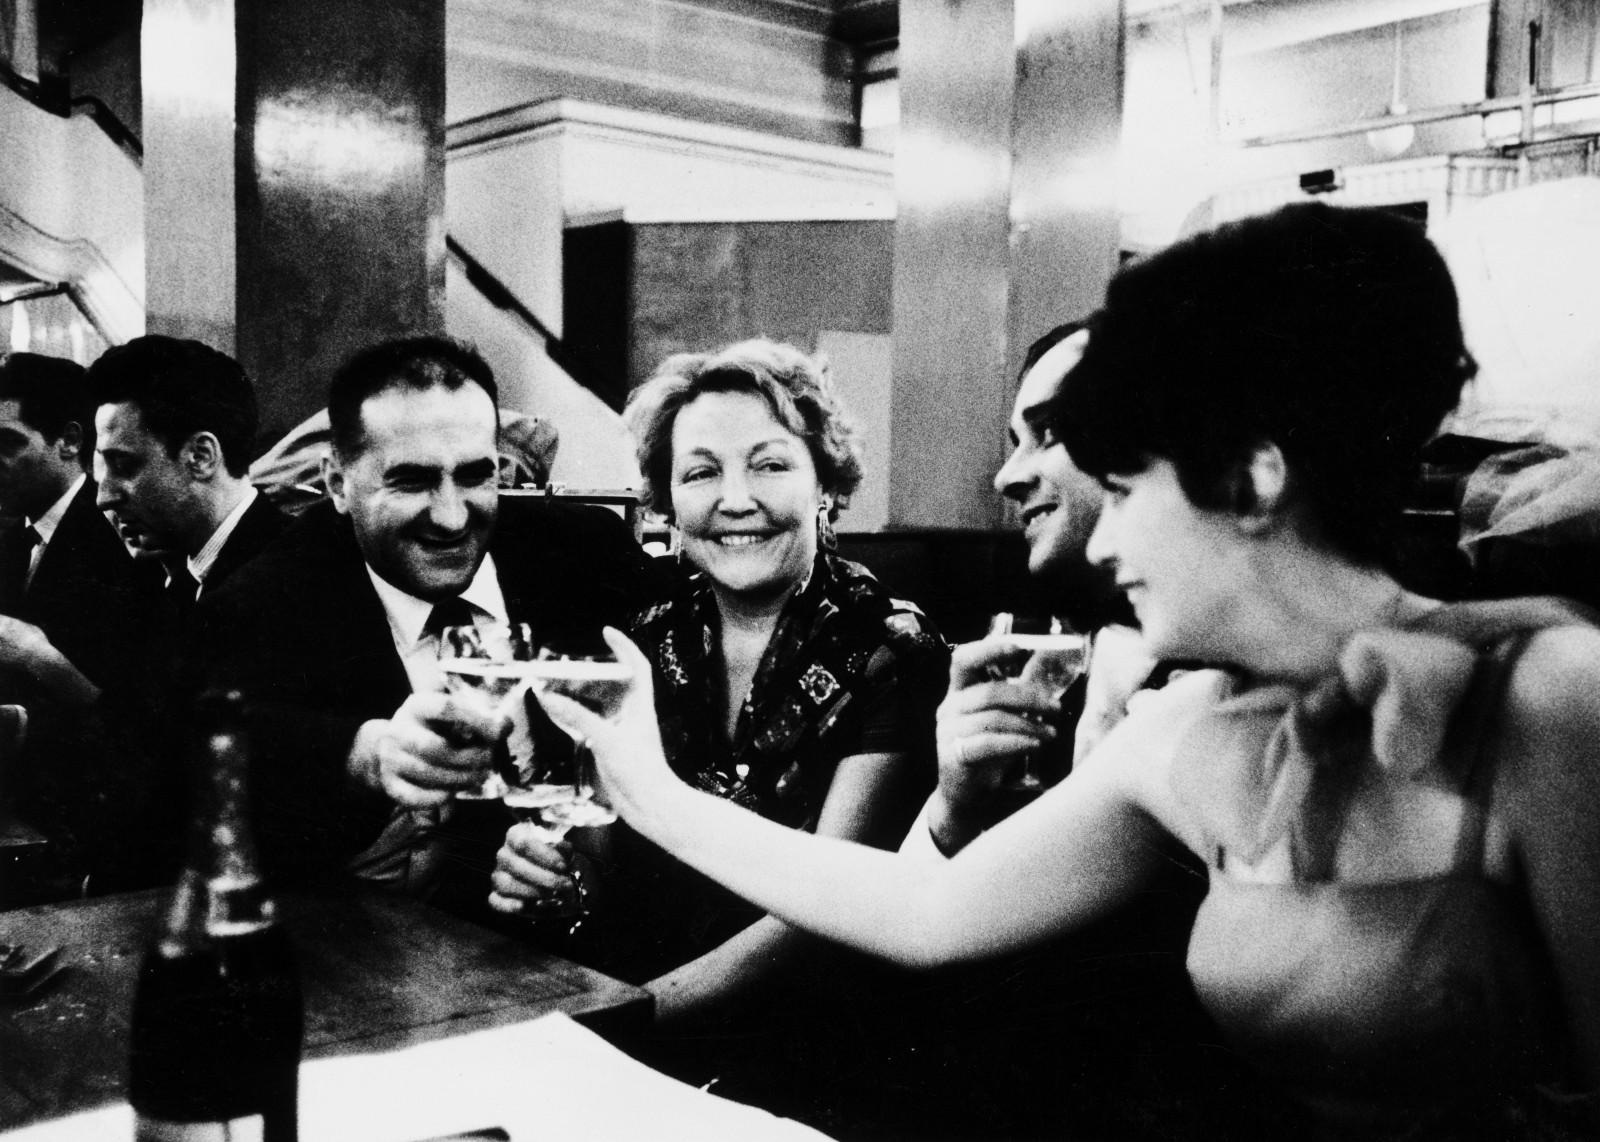 Raymond Hains toasts with Rotraut and Yves Klein on their wedding evening